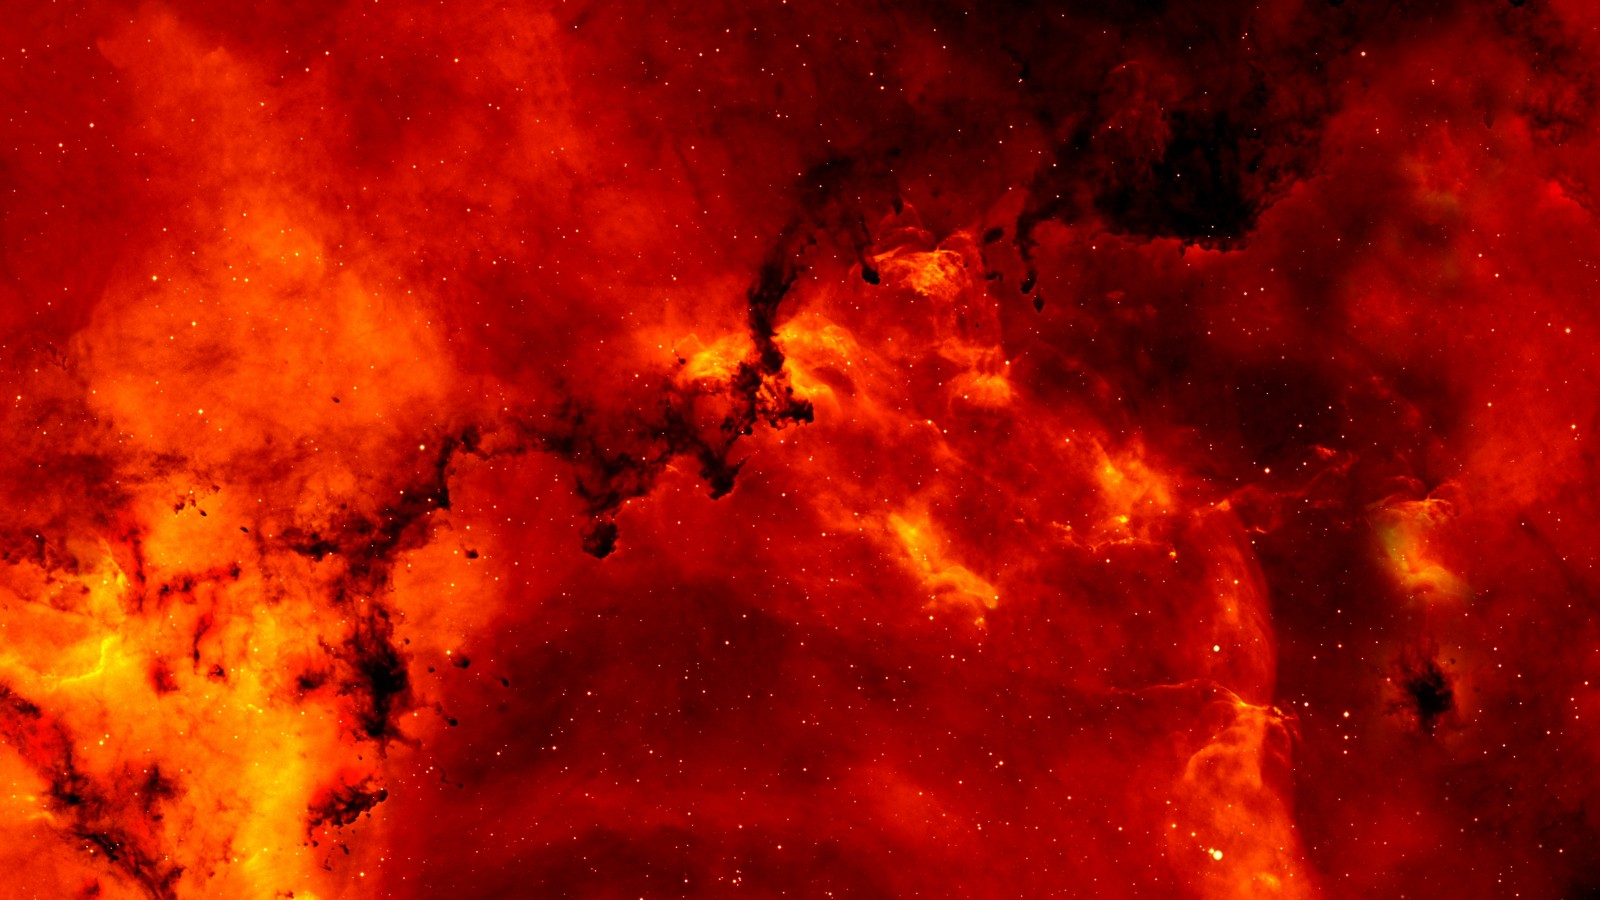 Red Galaxy Abstract Wallpaper 8643